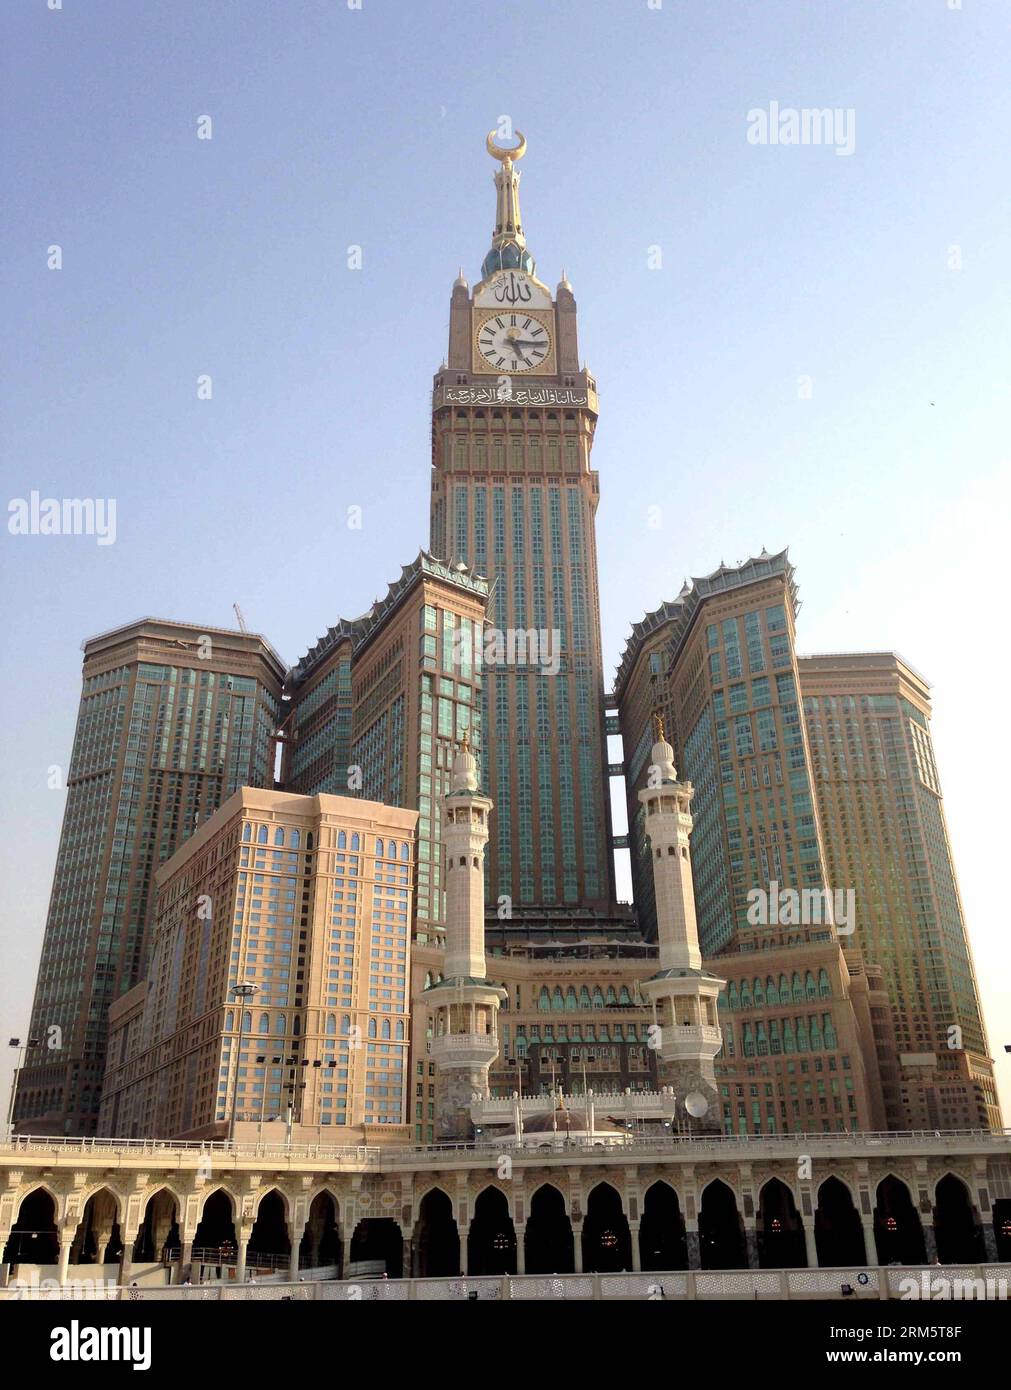 Bildnummer: 60714726  Datum: 14.11.2013  Copyright: imago/Xinhua (131114) -- RIYADH, Nov. 14, 2013 (Xinhua) -- Picture taken on Oct. 10, 2013 shows Makkah Tower in Makkah, Saudi Arabia. Makkah Tower retains its place as the 2nd tallest building in the world. Standing at the height of 1,972 feet (601.07 m), the Abraj Al-Bait Tower, also known as Makkah Royal Clock Tower, has been declared the second tallest building in the world by the United States Council on Tall Buildings and Urban Habitat that is recognized as a world authority on supersized skyscrapers. Only Burj Khalifa in Dubai, which is Stock Photo